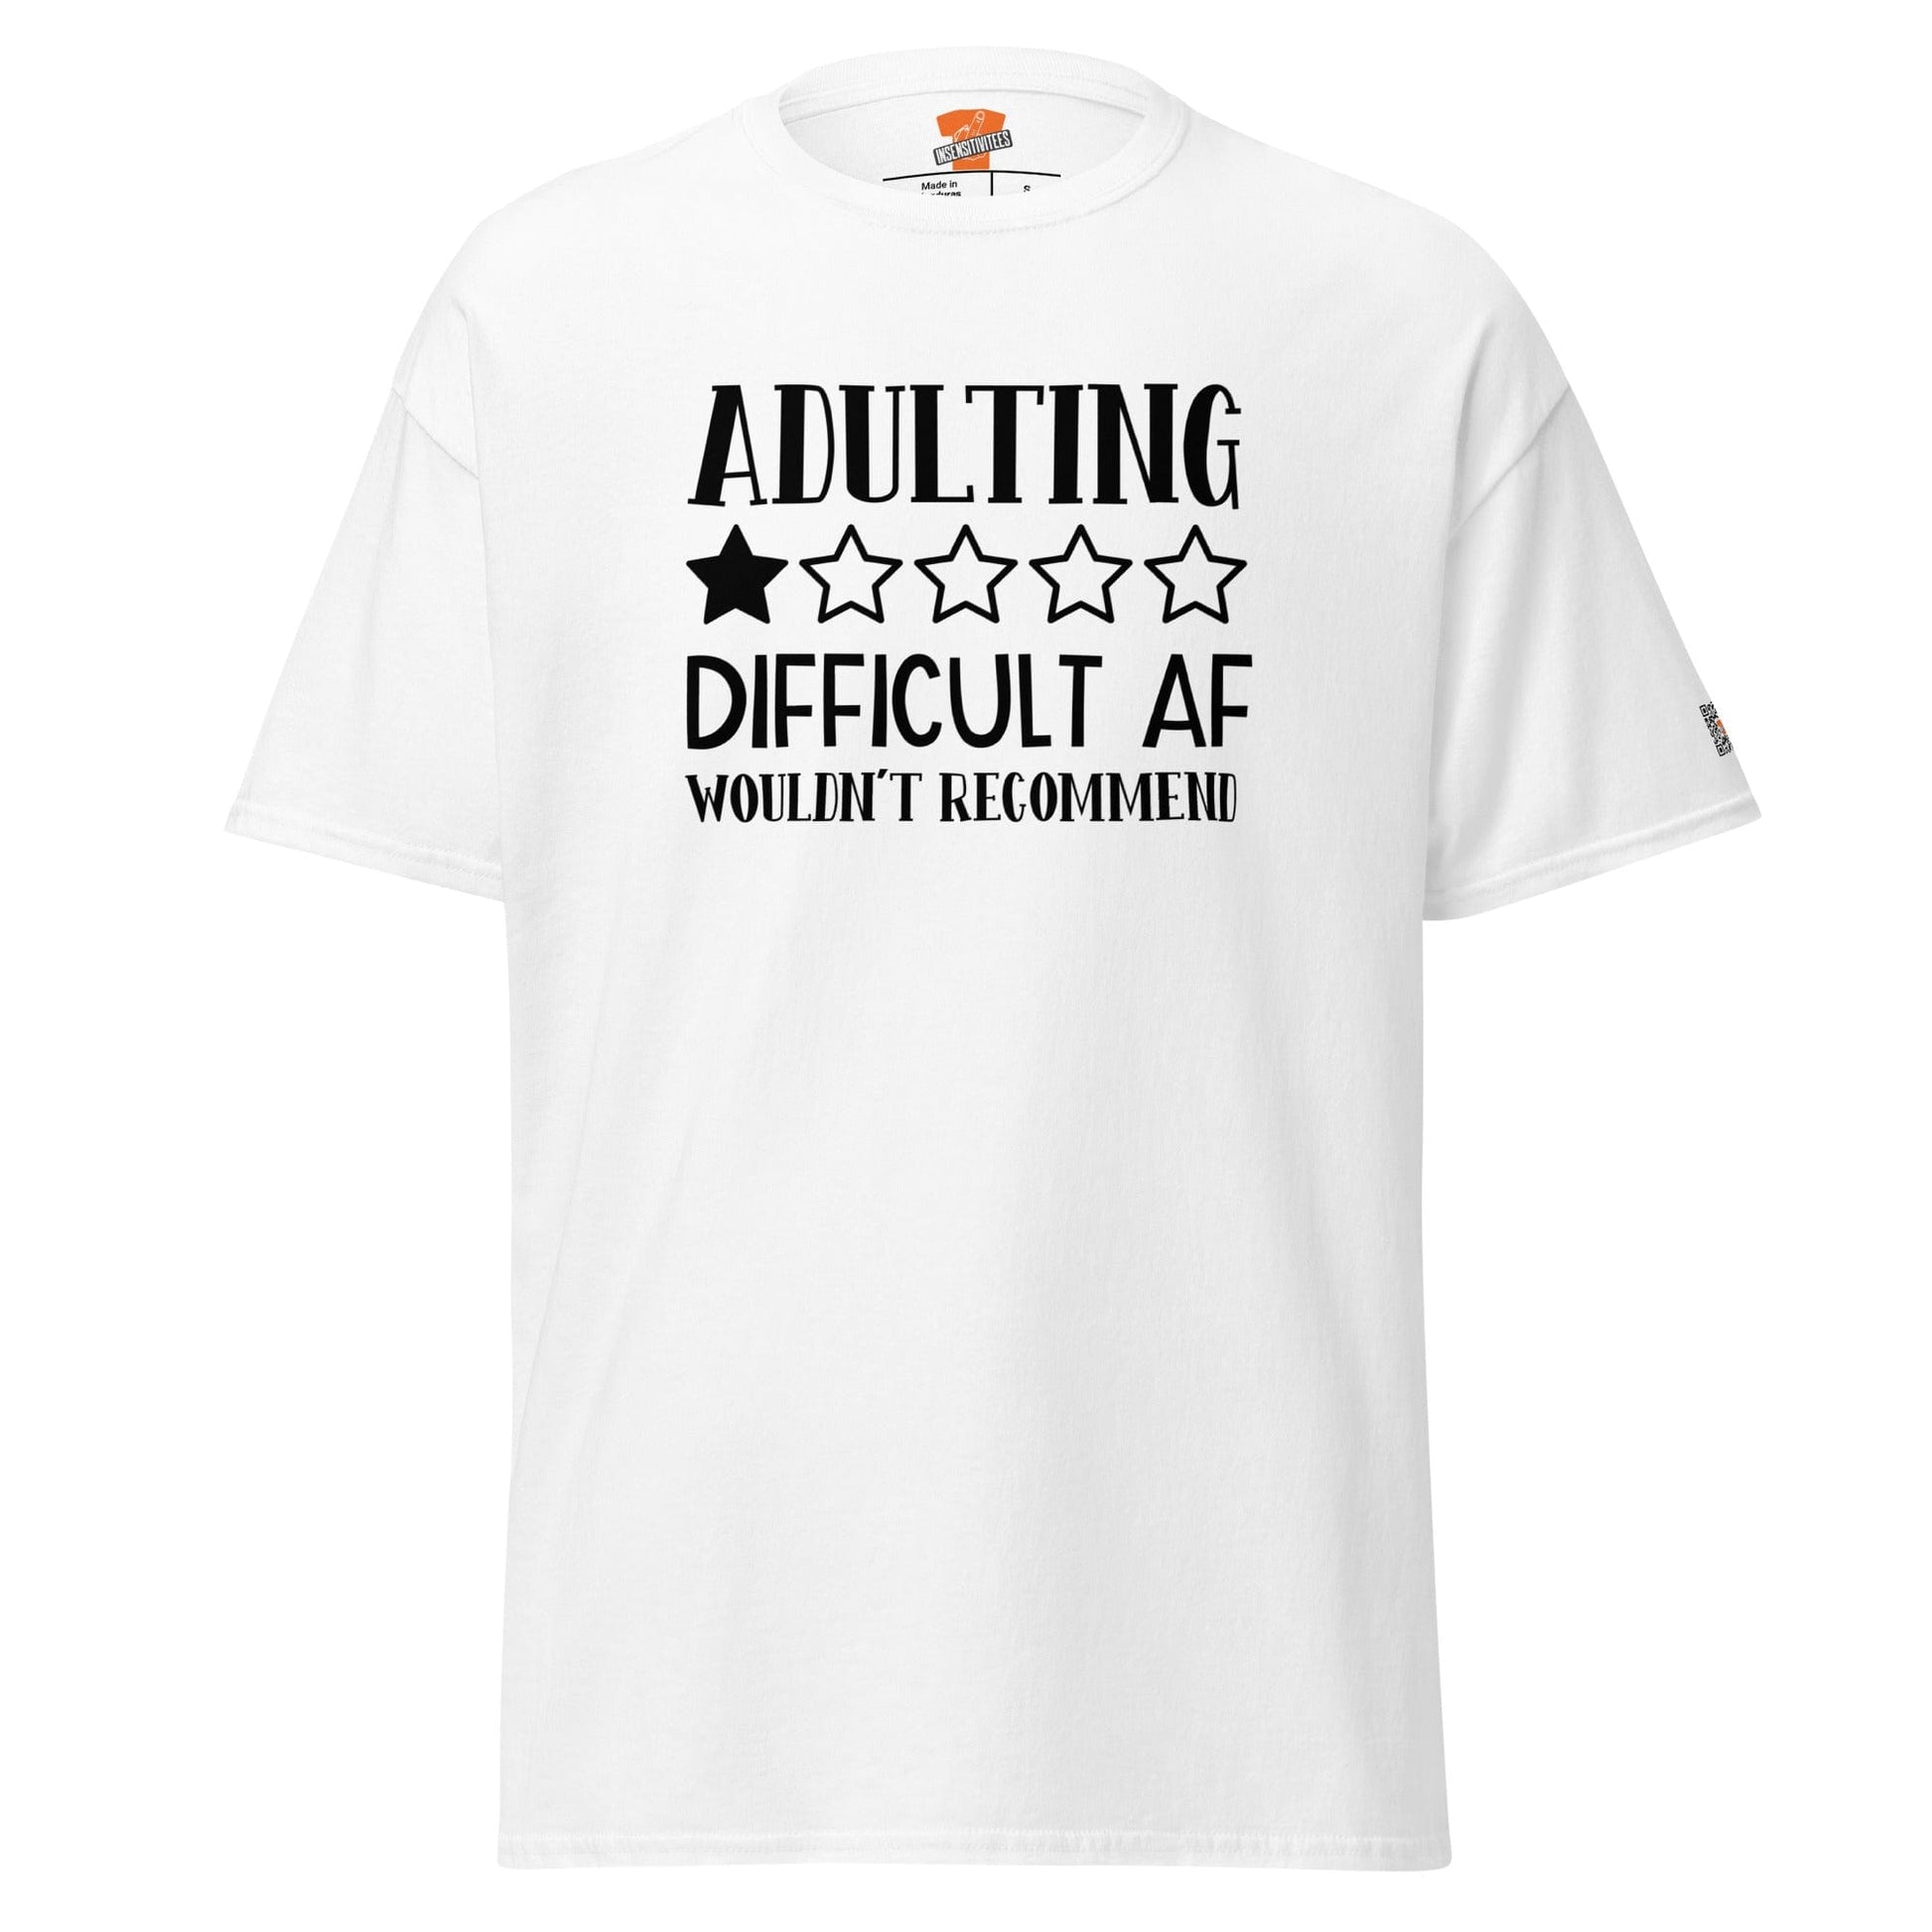 InsensitiviTees™️ White / S Adulting Difficult AF Unisex Tee